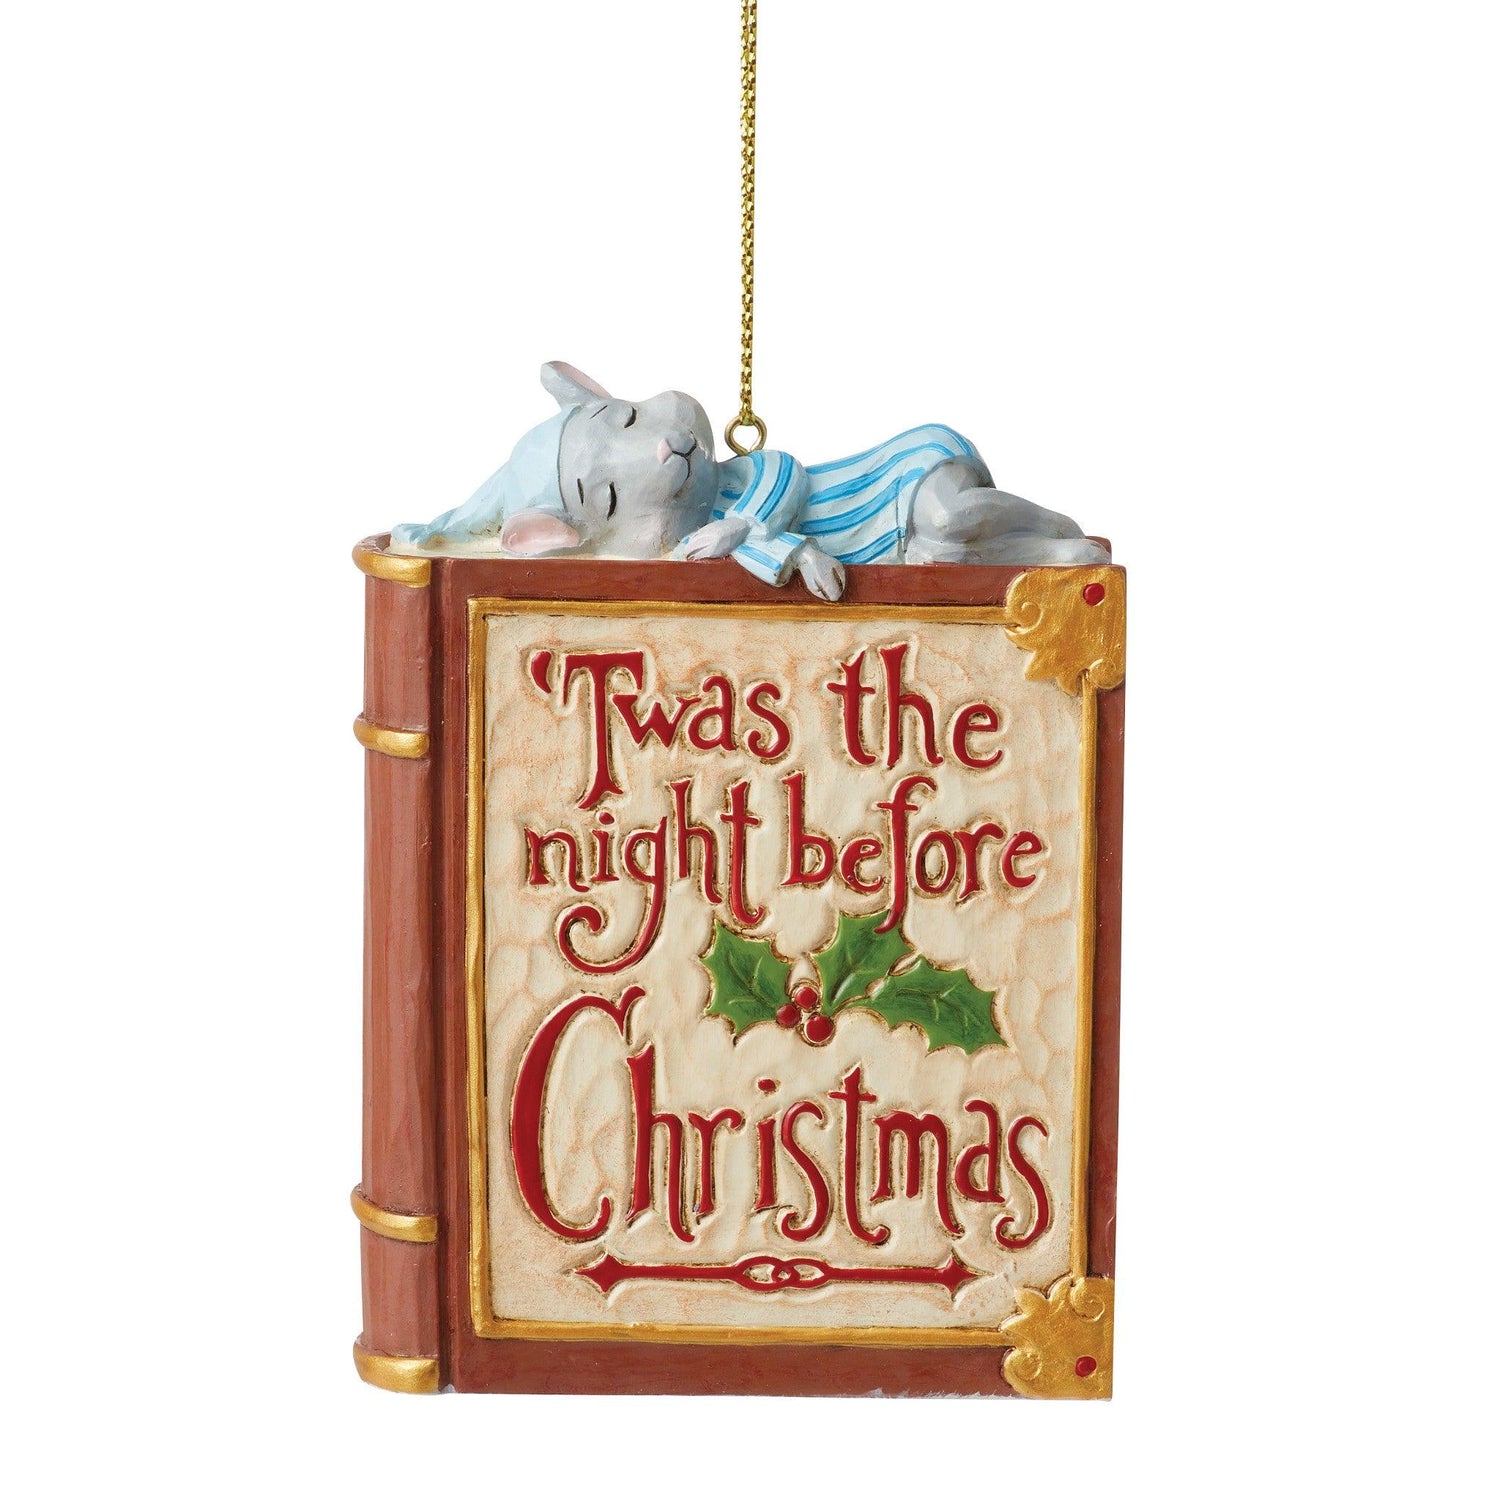 Twas the Night Before Christmas - Gallery Gifts Online 